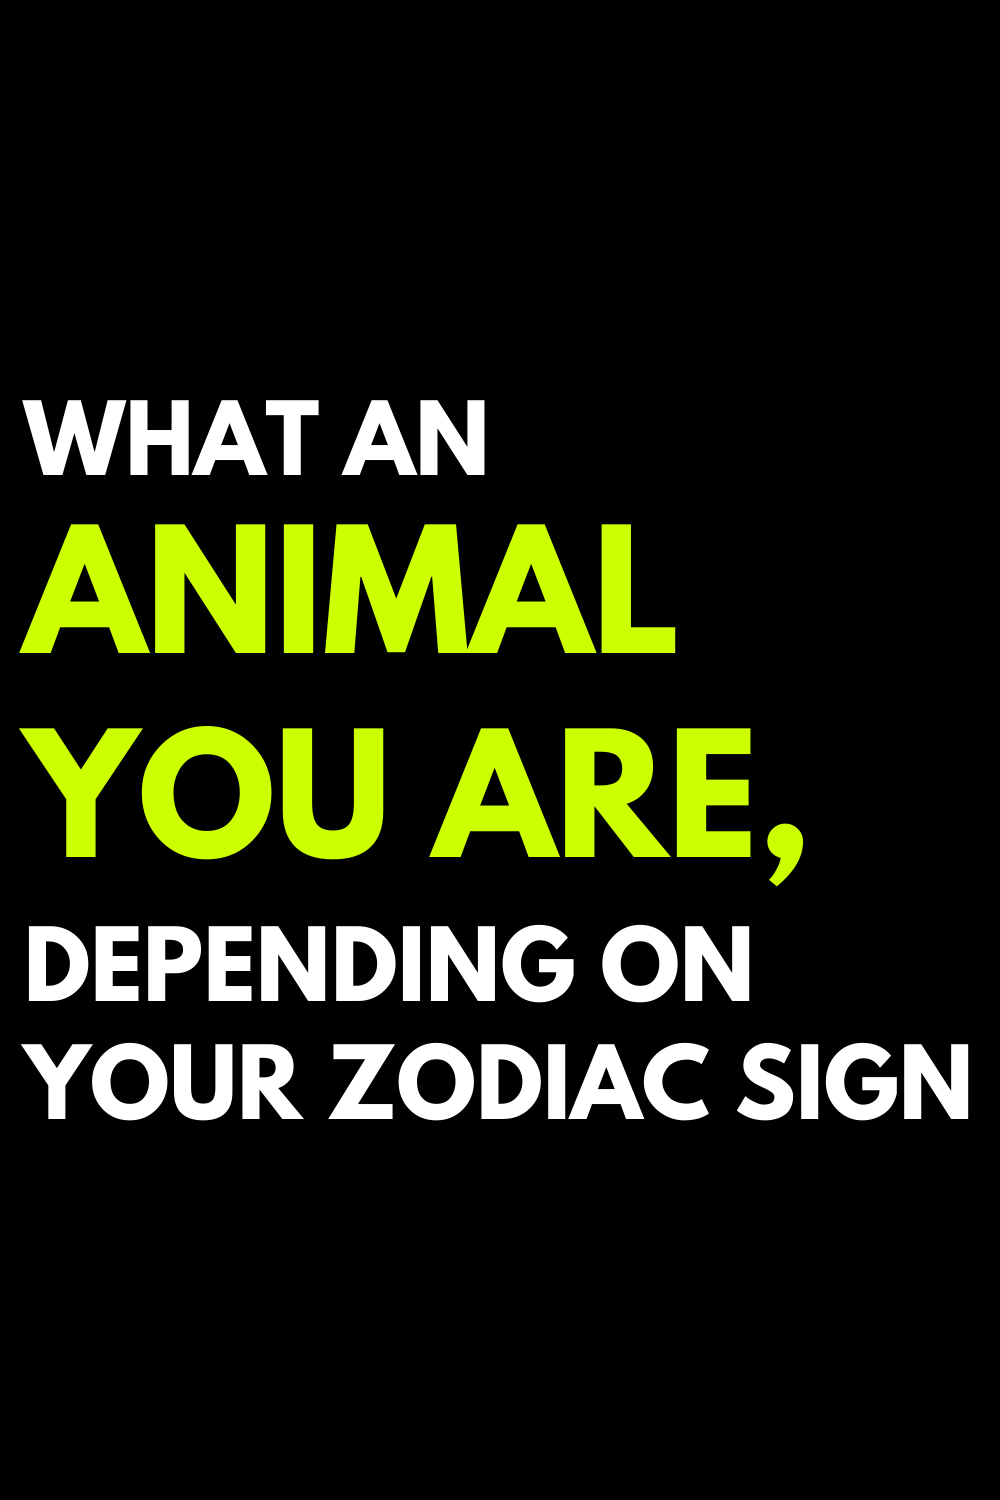 What an animal you are, depending on your zodiac sign